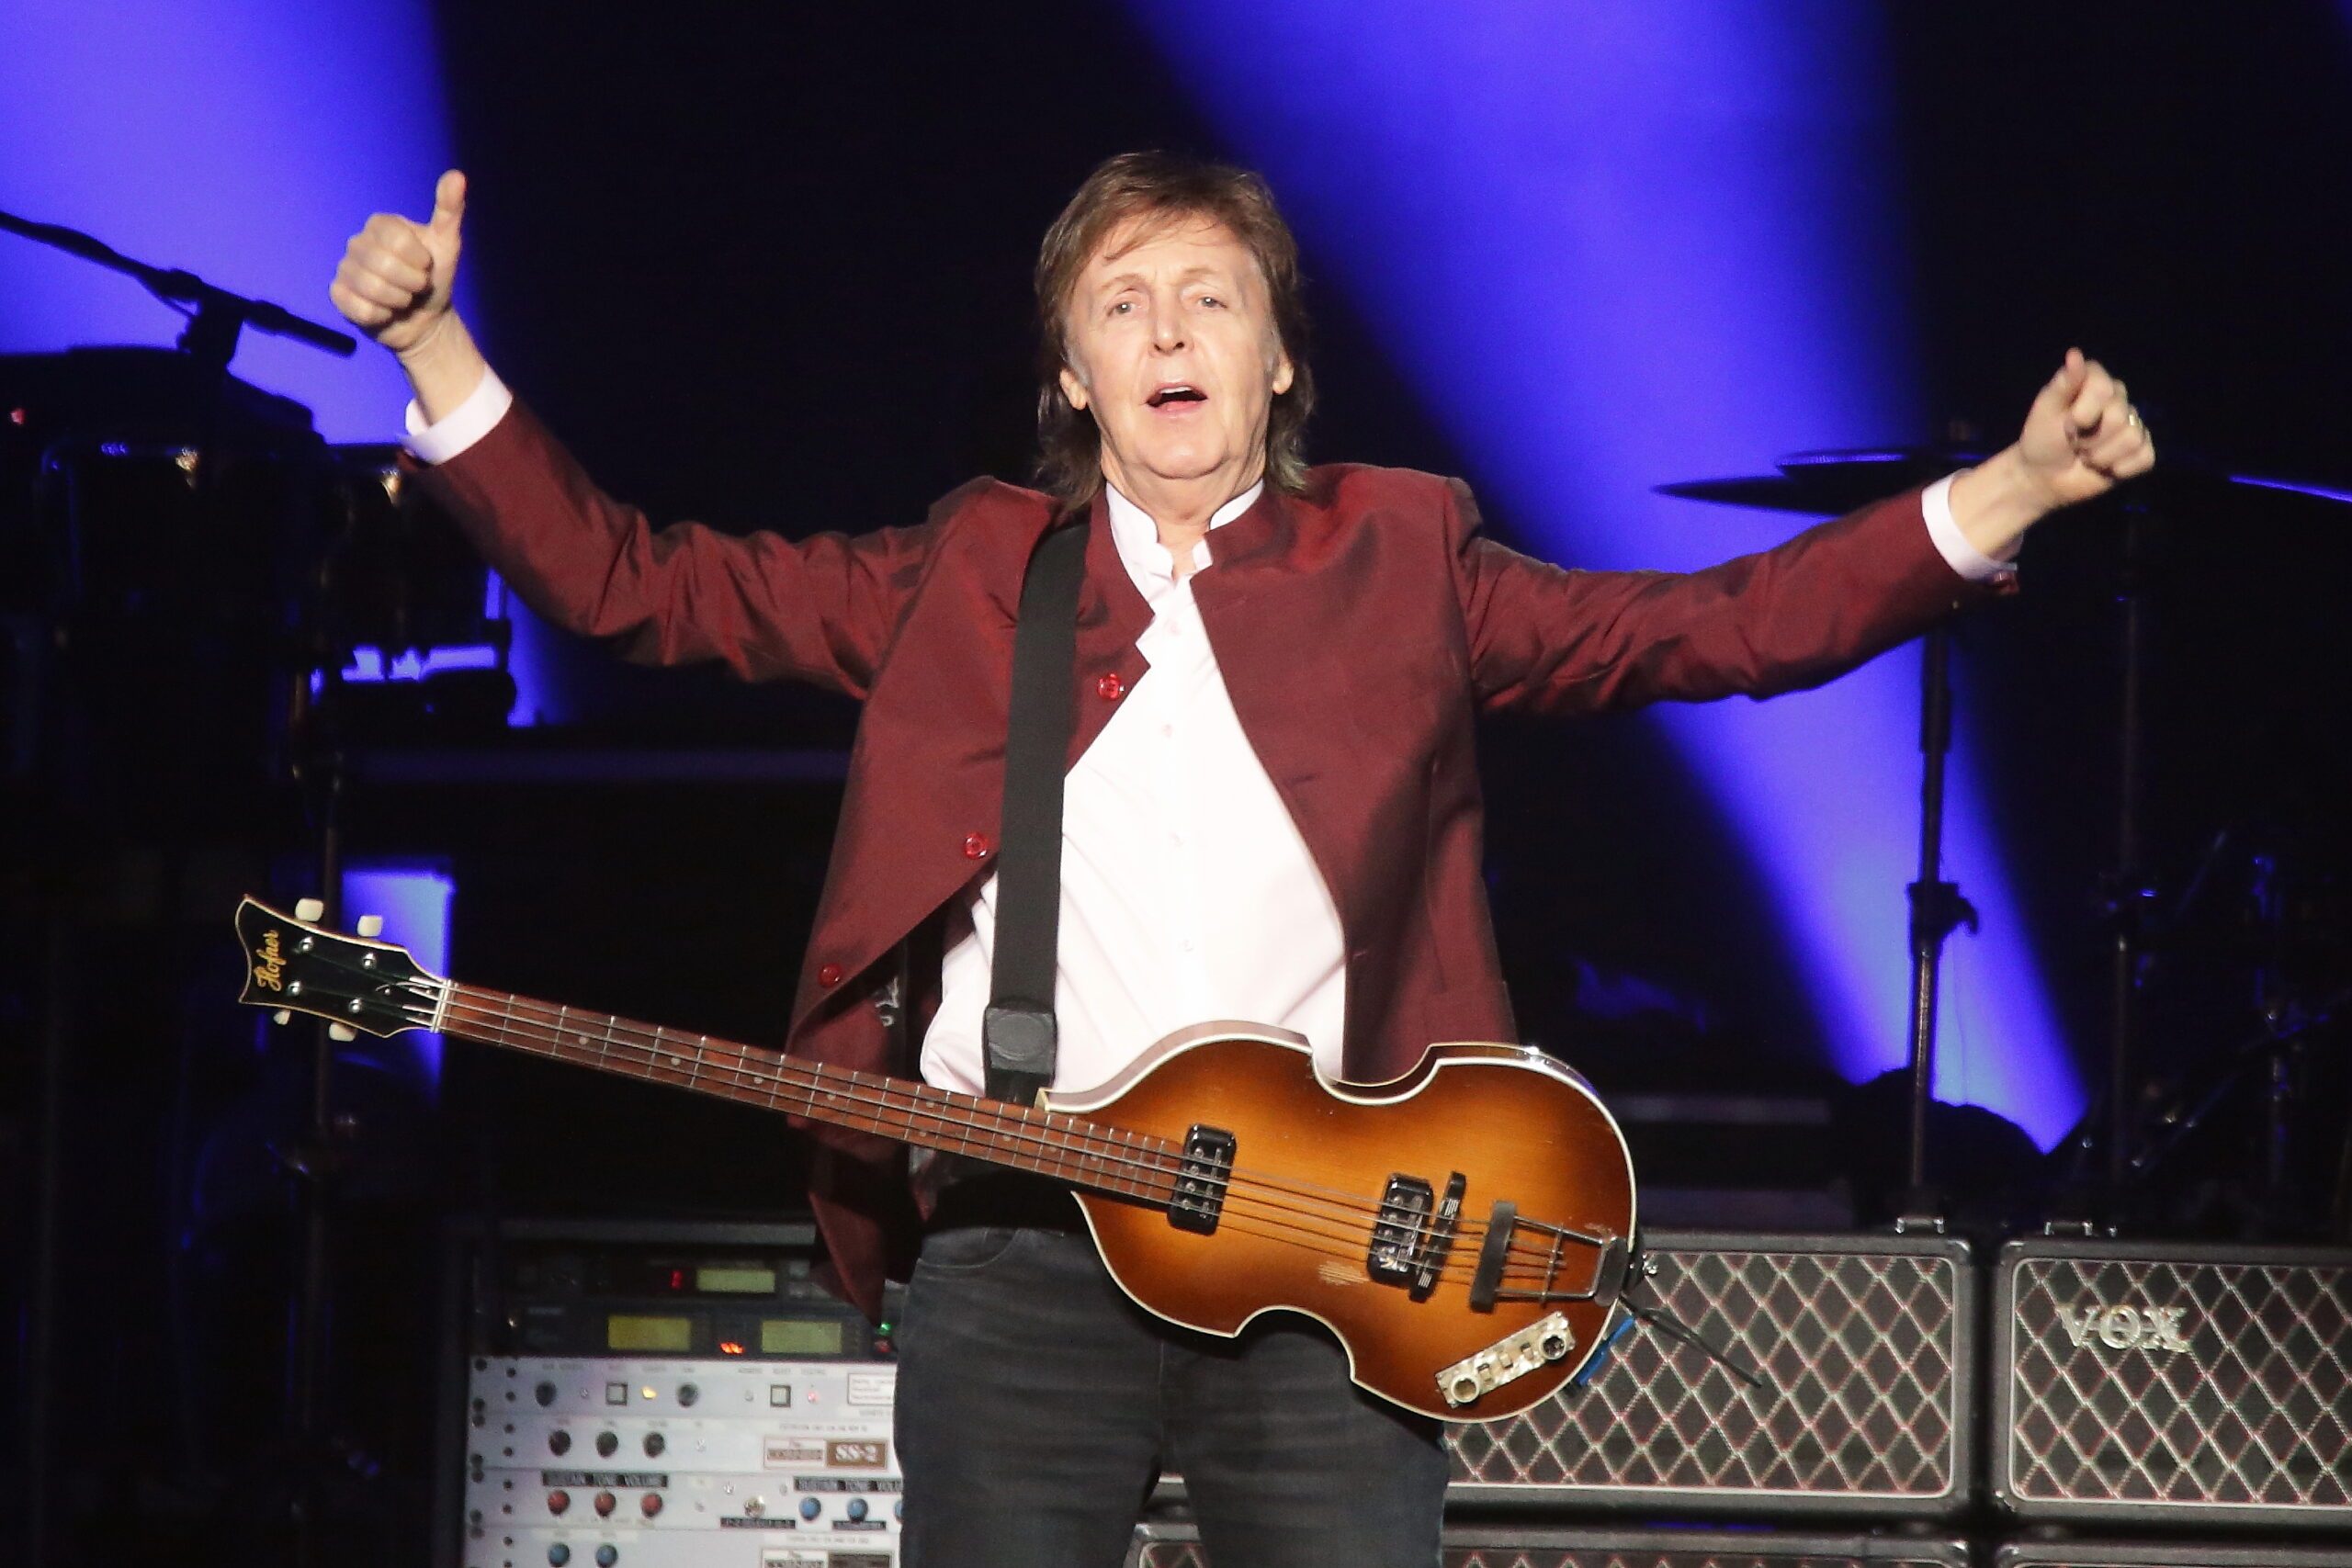 Paul McCartney working on new album, signs with Capitol